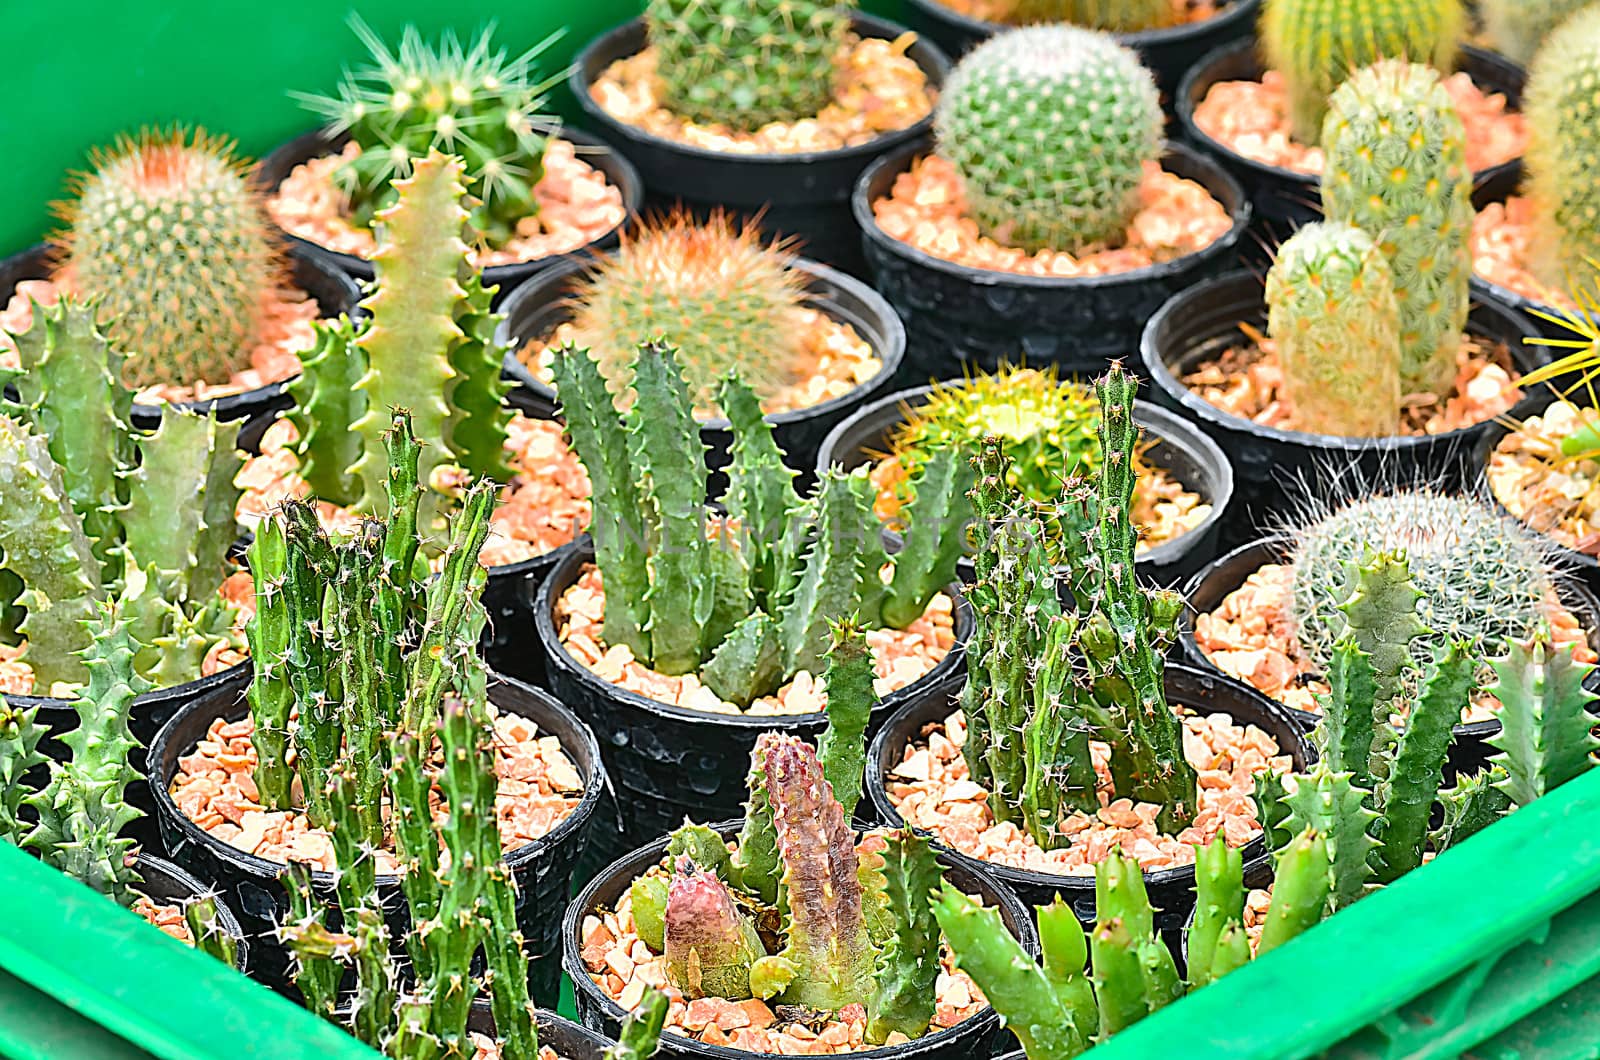 Variety of Cactus in tray